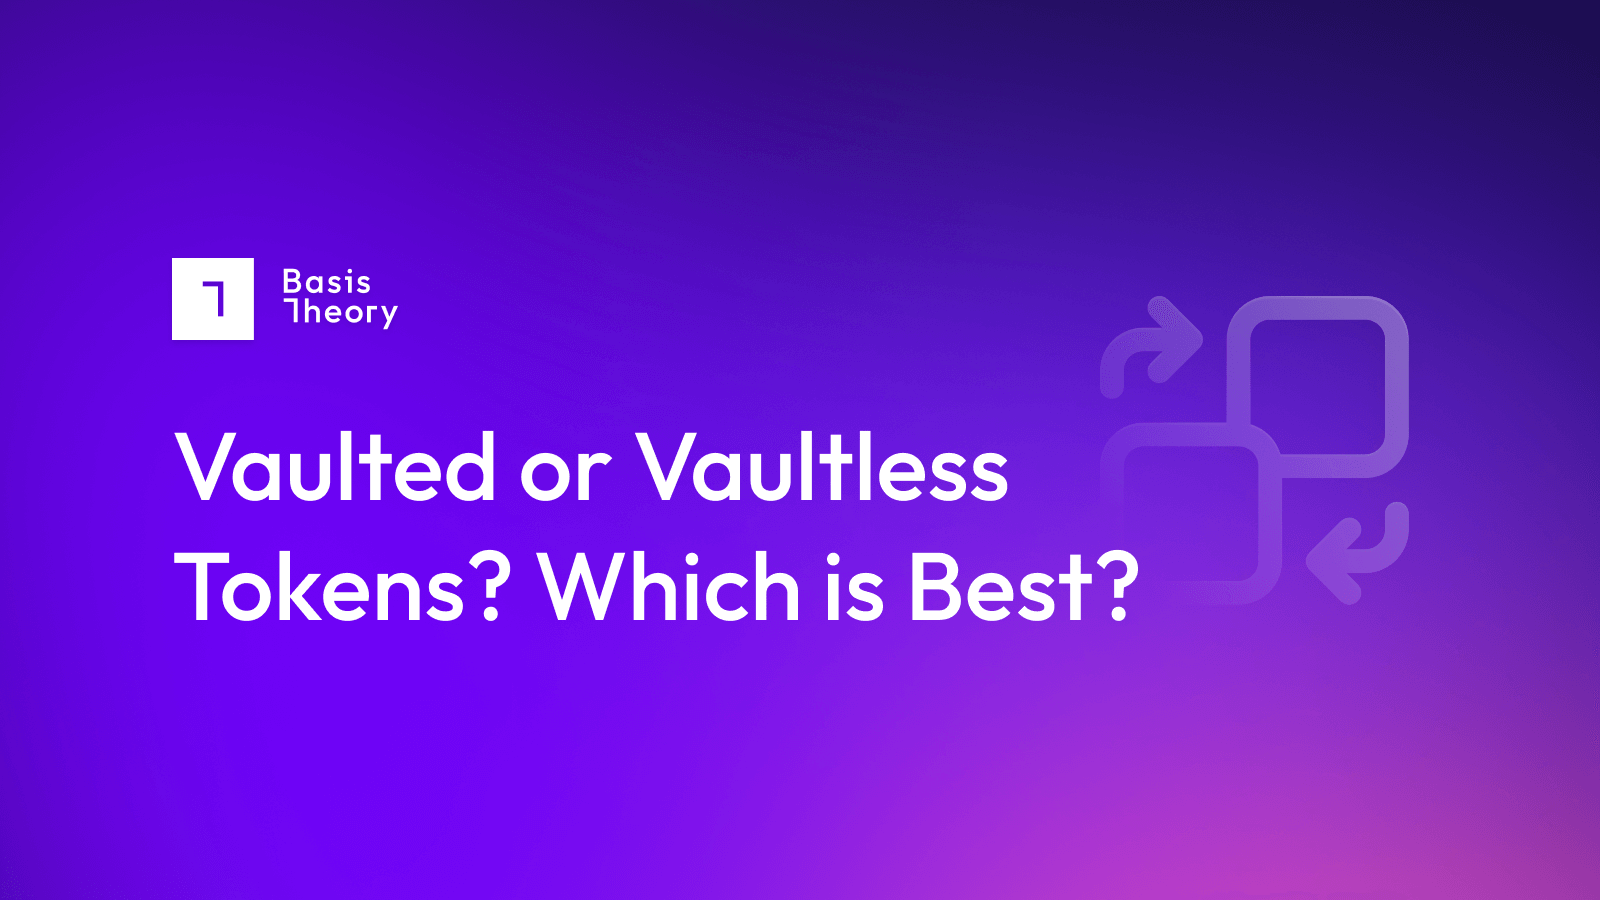 Vaulted or Vaultless Tokens? Which is Best?